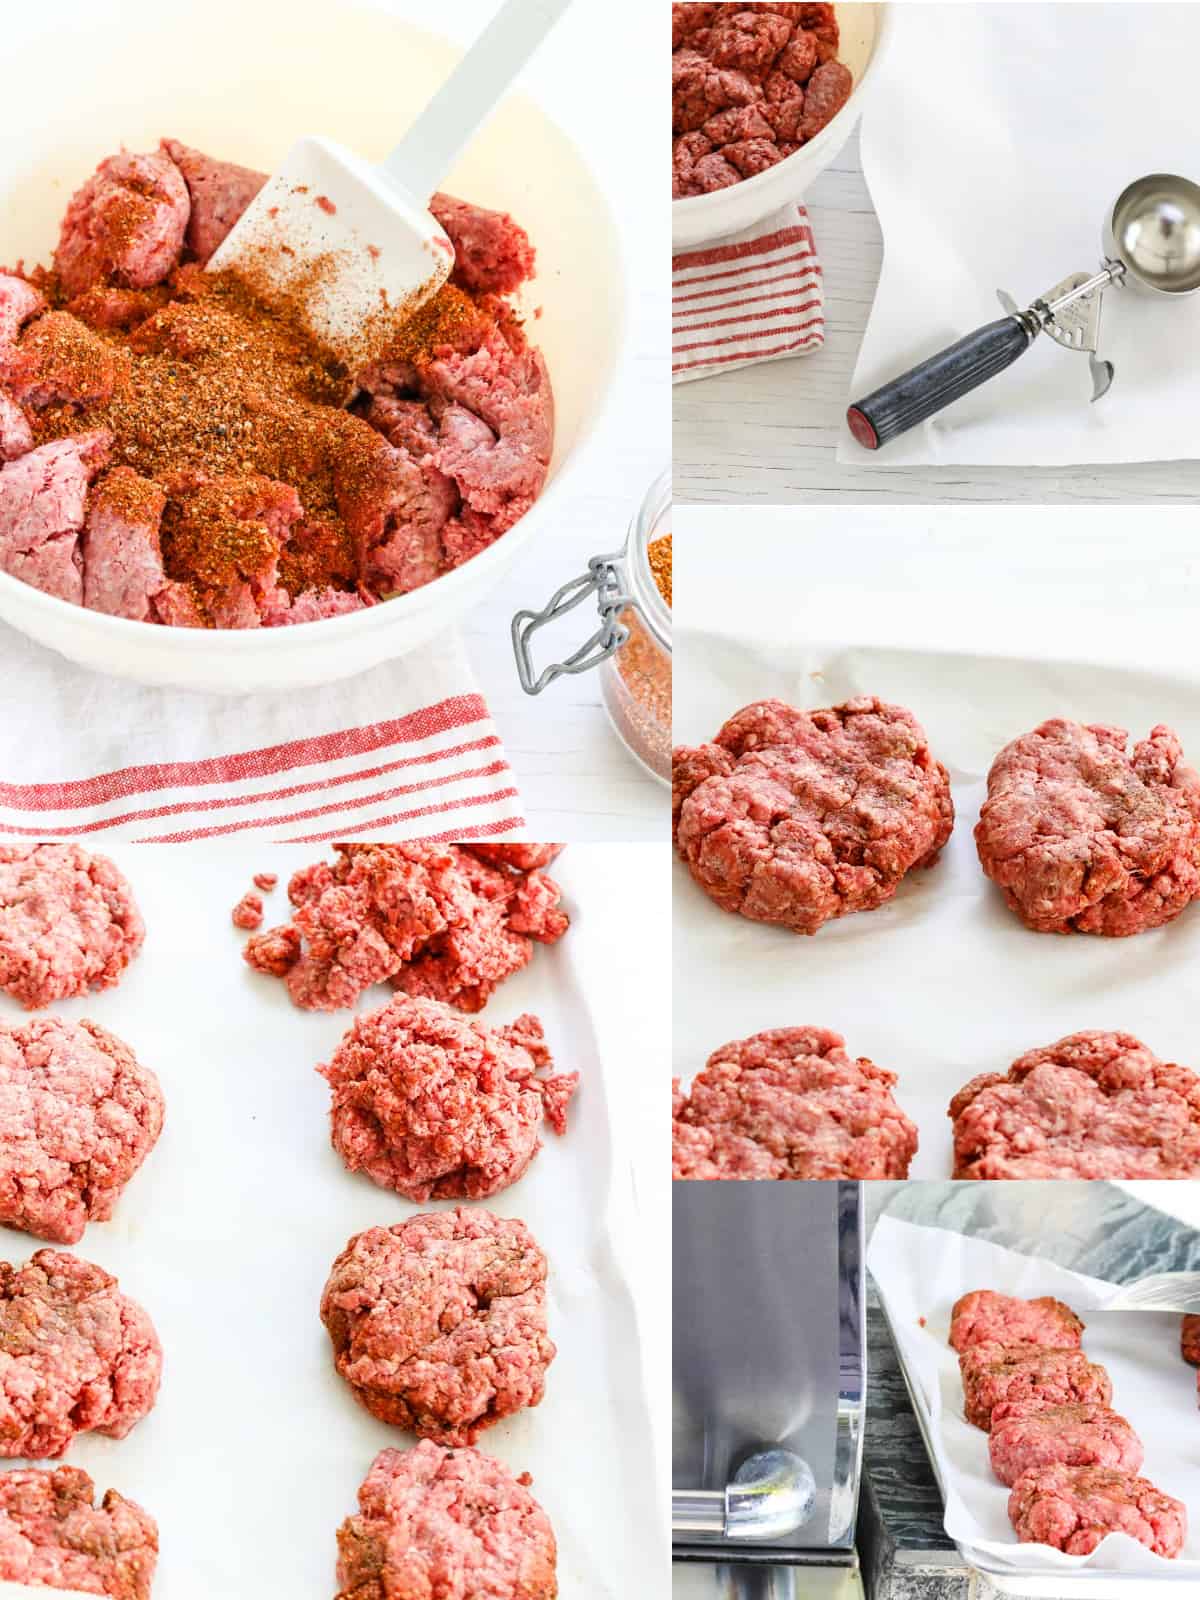 Showing how to mix the grill and BBQ rub into ground beef for hamburger patties on the grill.